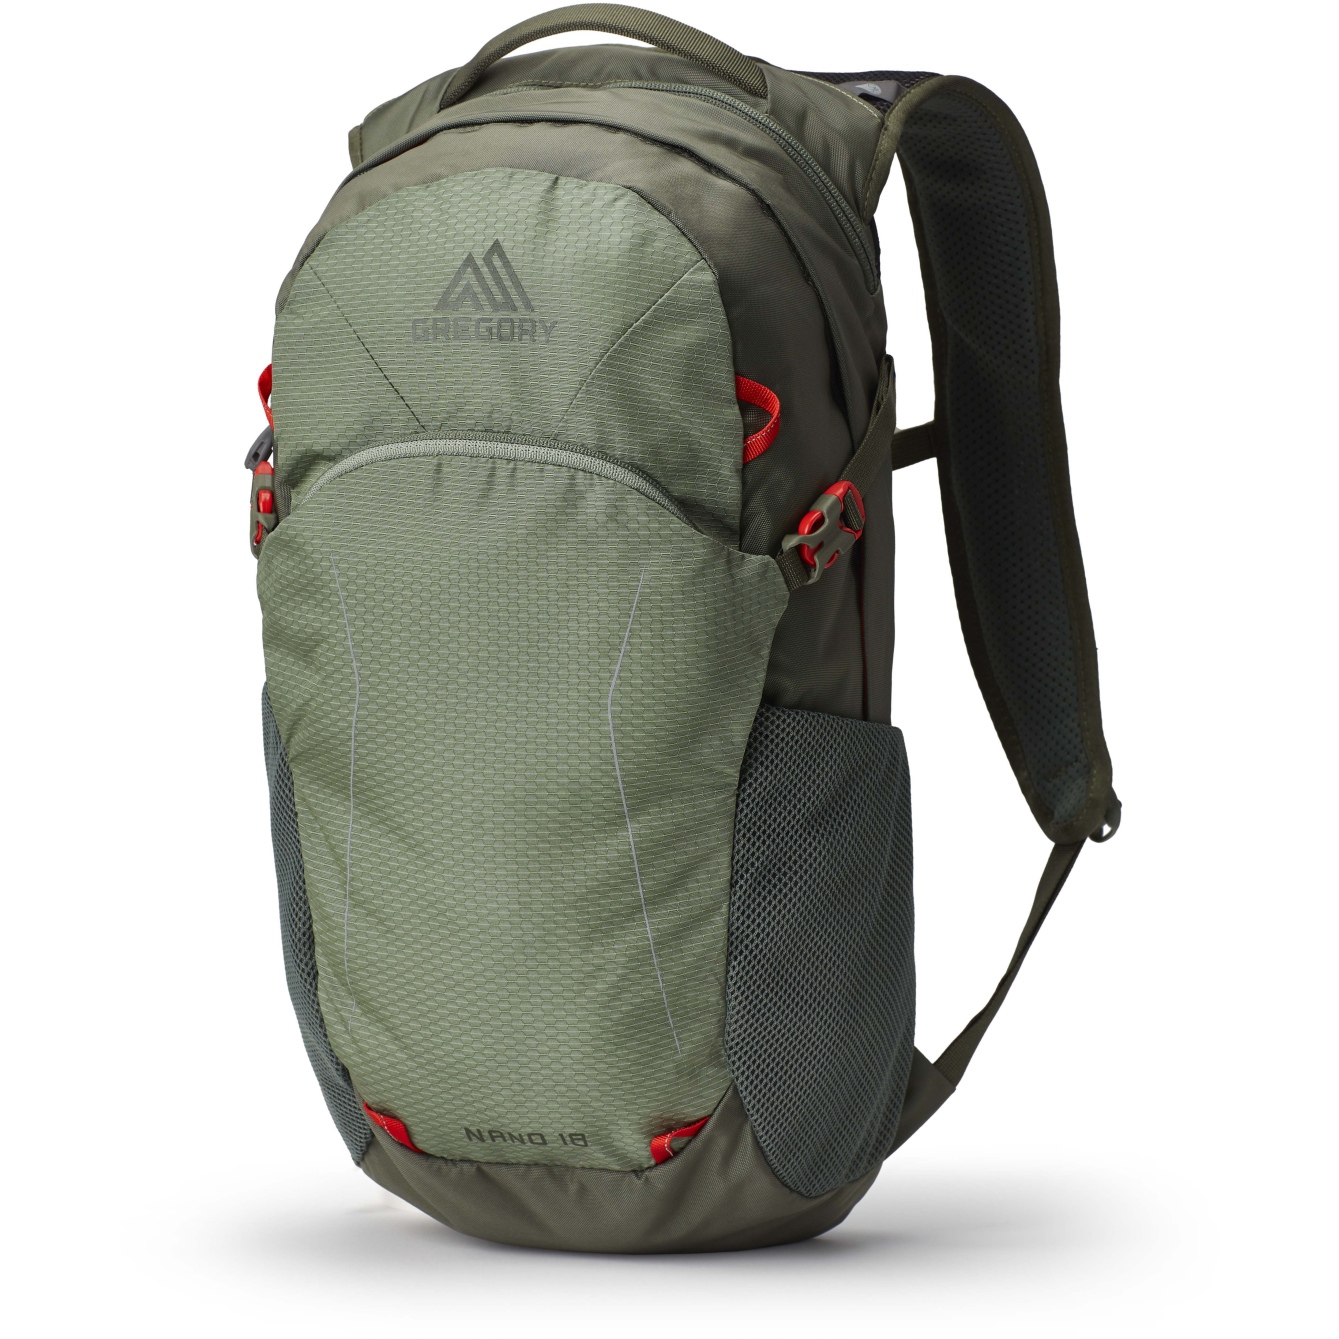 Picture of Gregory Nano 18 Backpack - Blaze Green